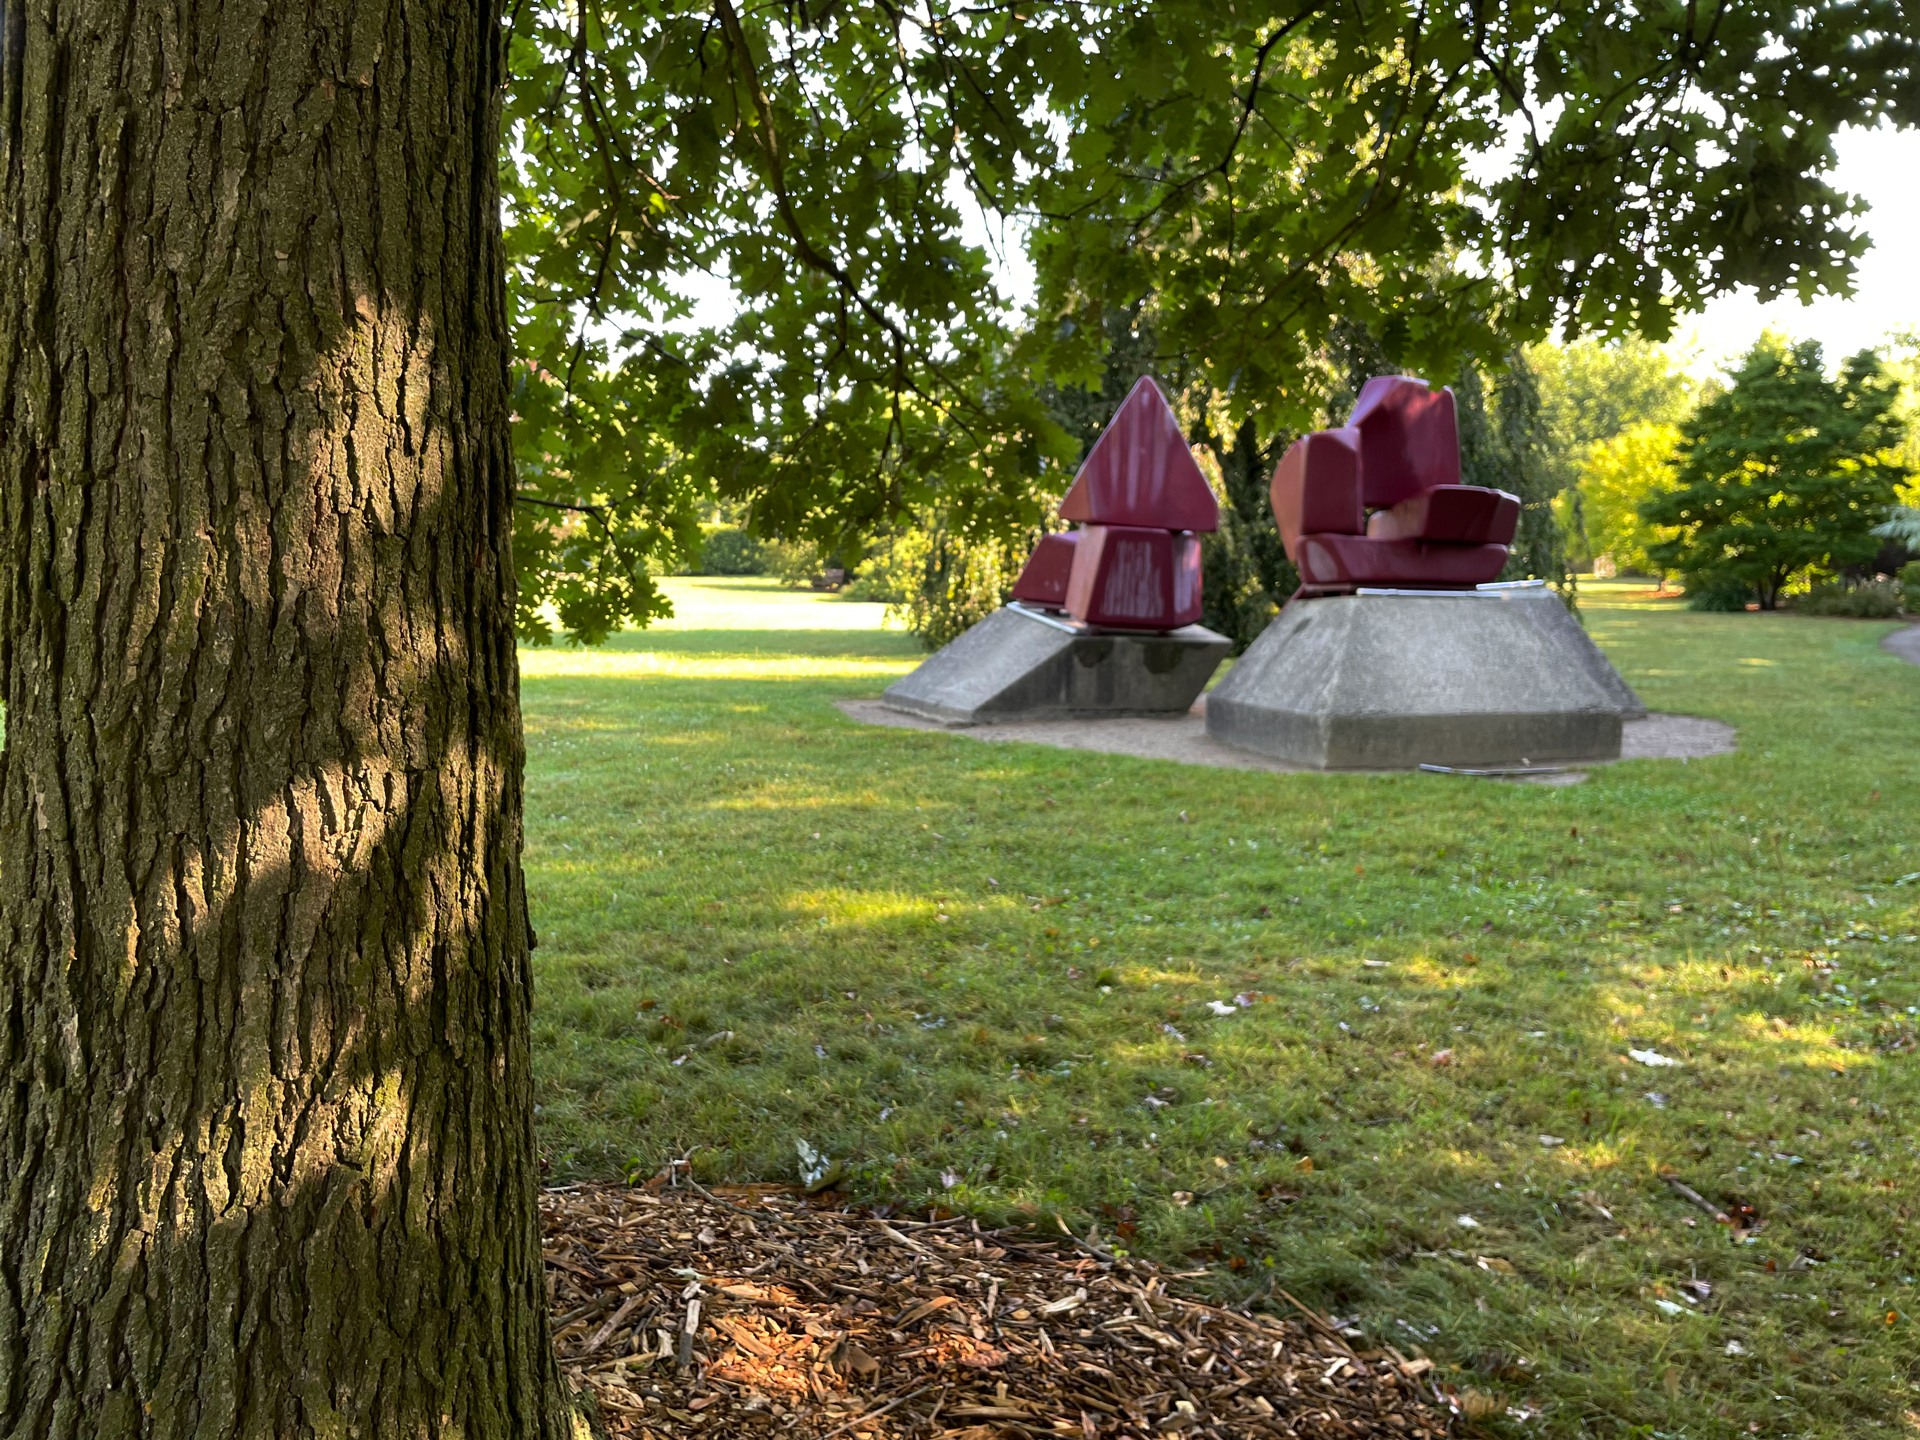 colour photo of a sculpture in a park from under a tree on a rainy day